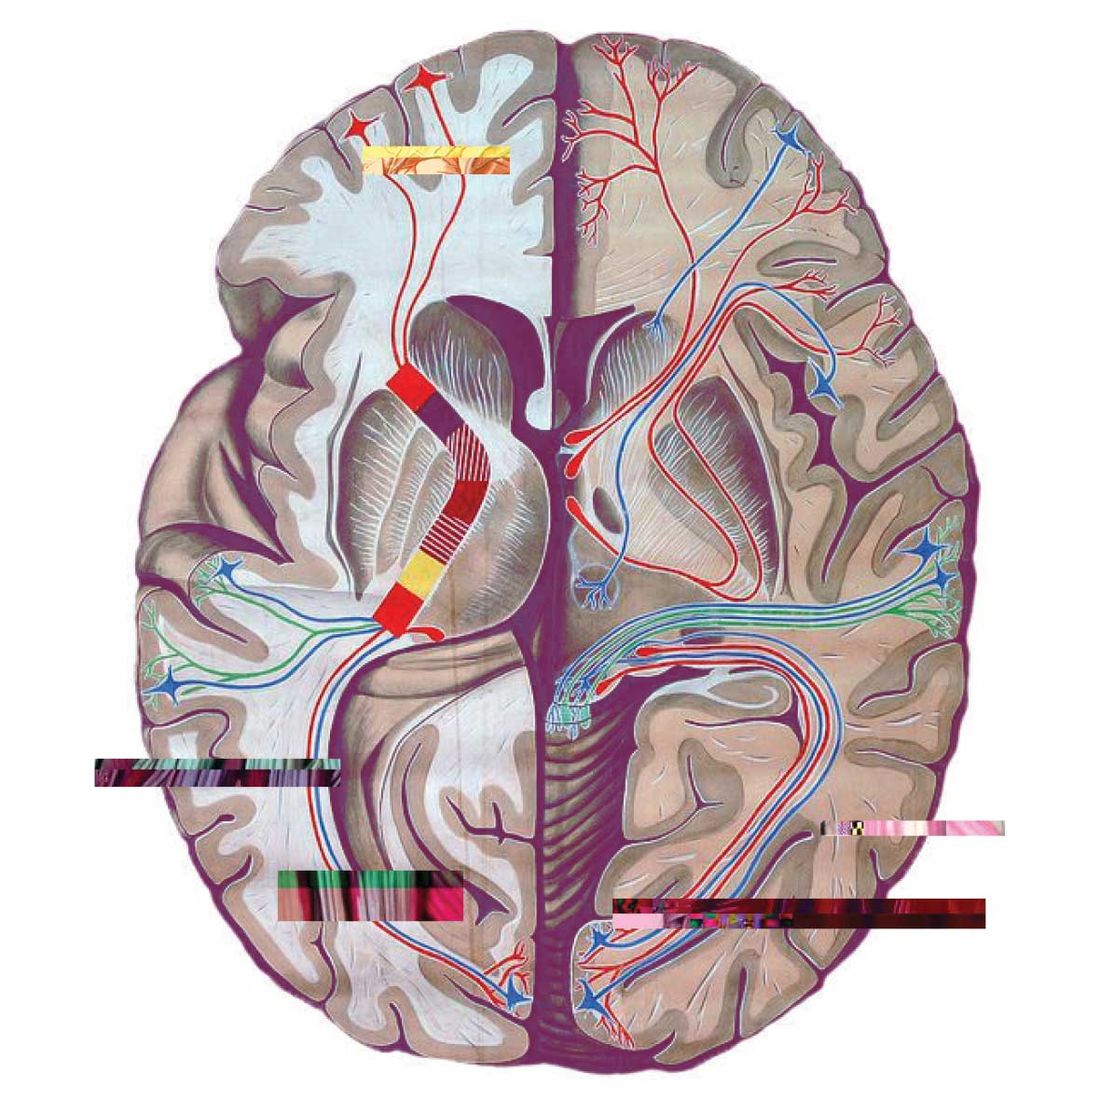 Illustration of a brain cross section